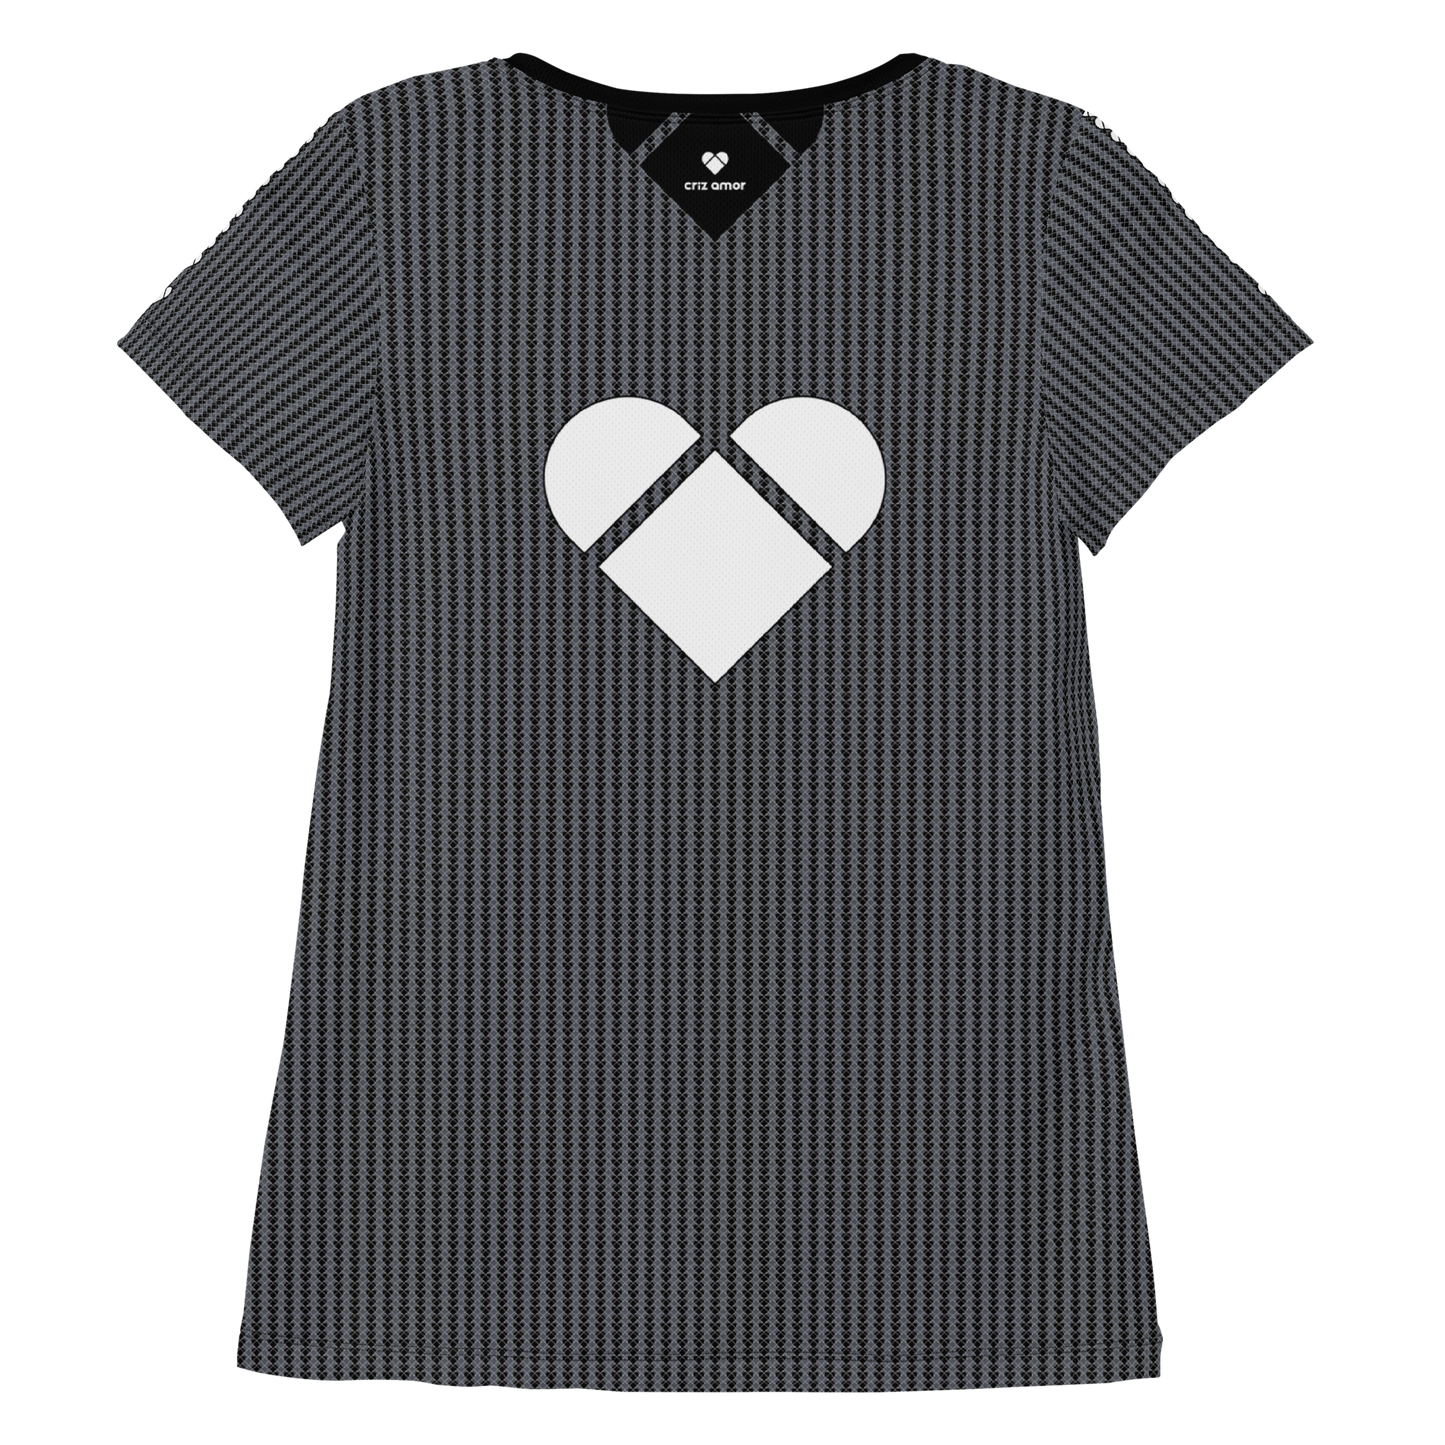 Amor Primero's Heart Sport Shirt, a Dual-Shade Lovogram Patterned Black Shirt with a White Heart for Active Women, back